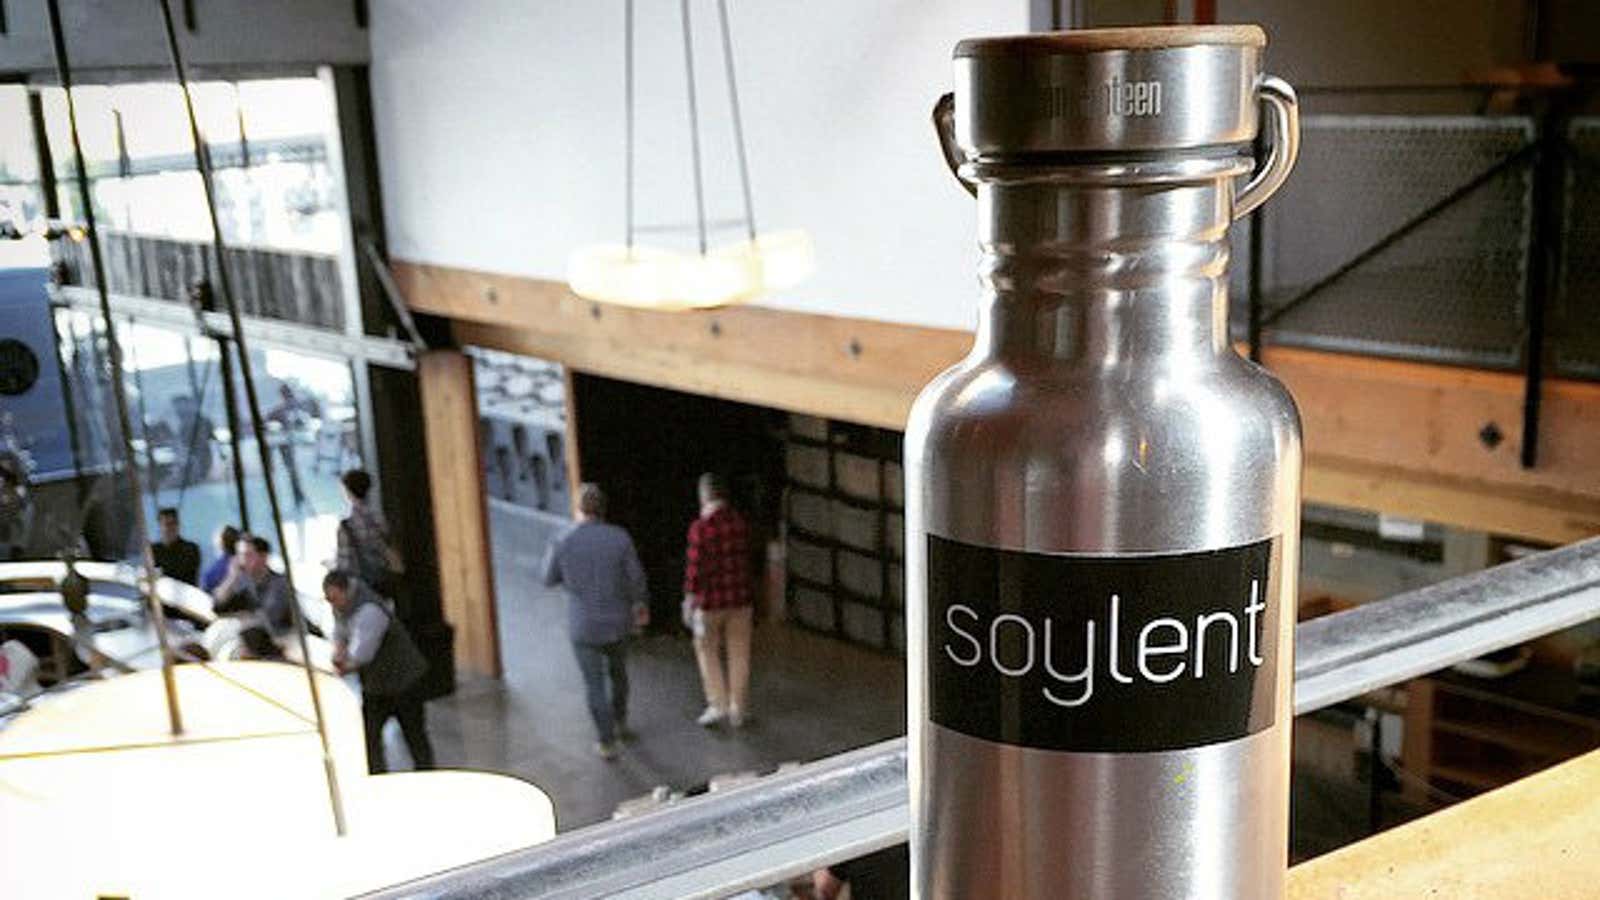 It’s unlikely that Soylent will lose its cult following anytime soon.